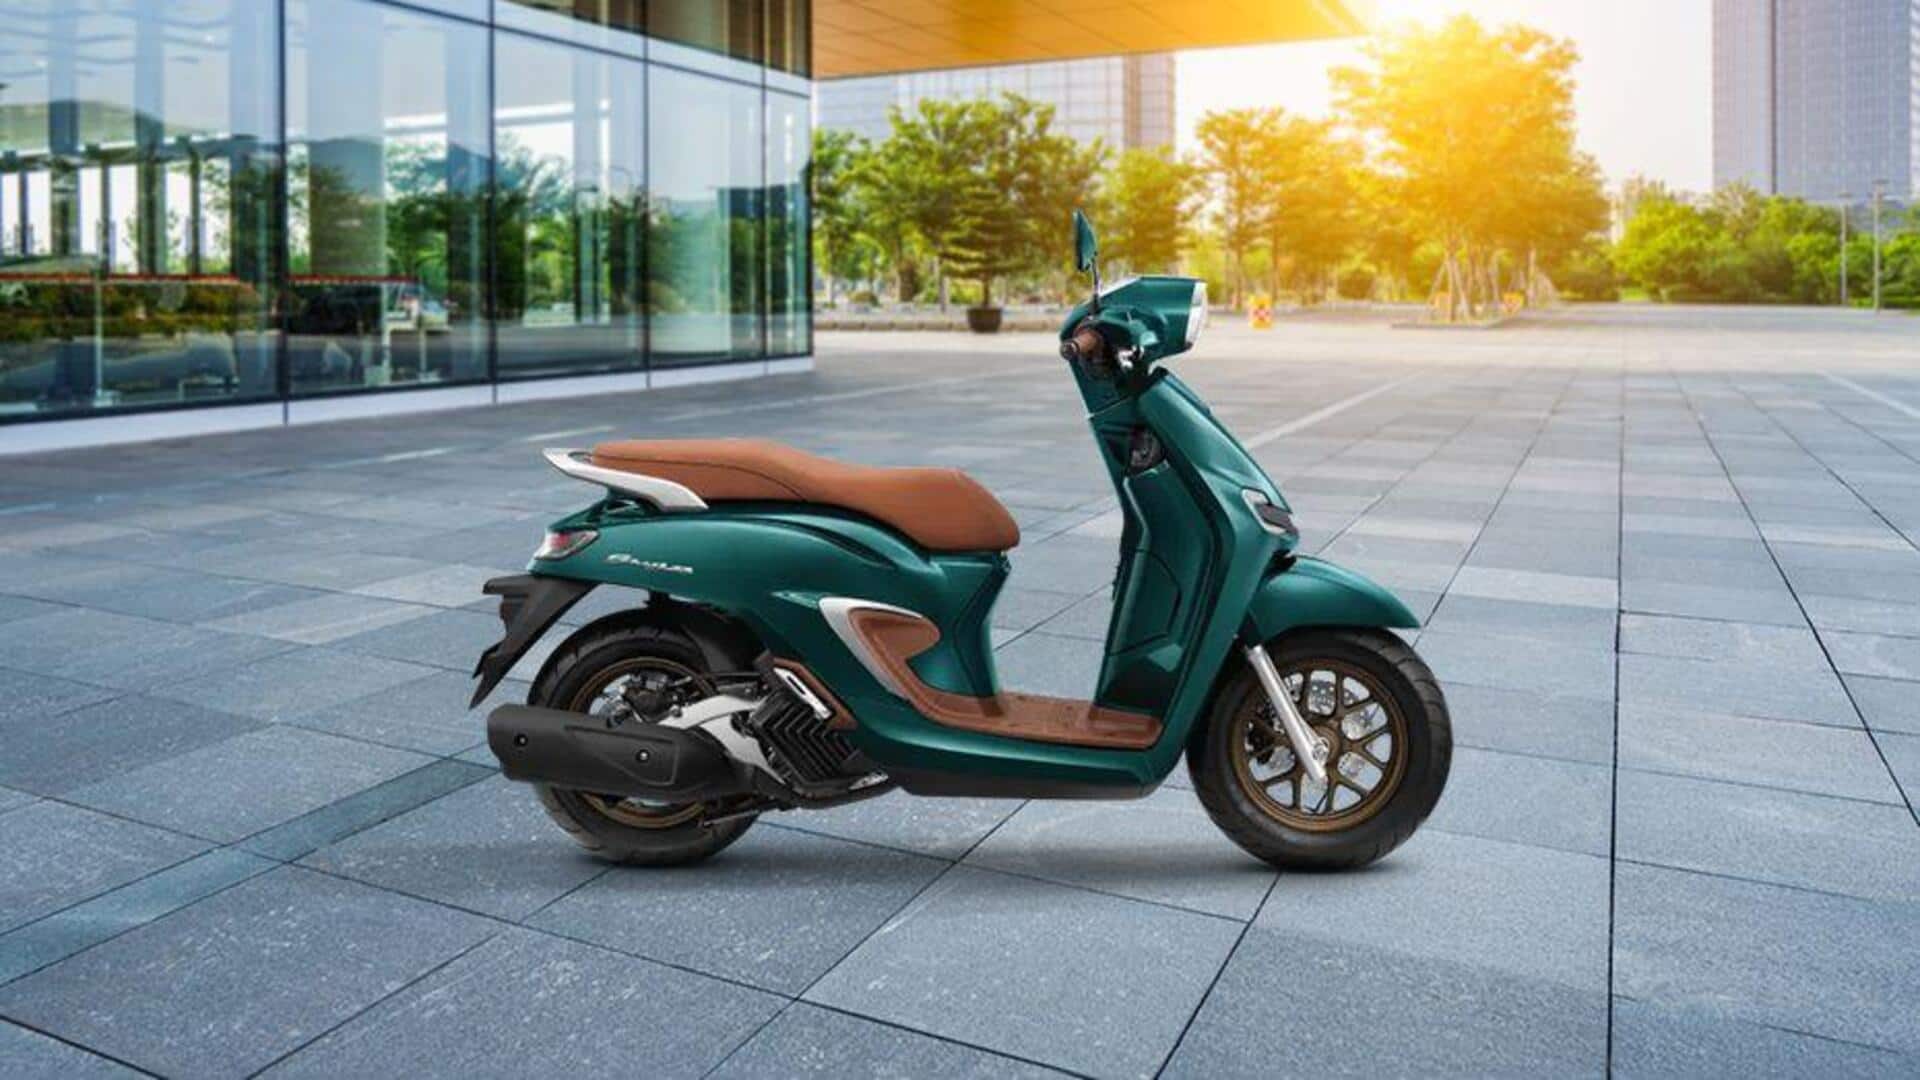 Honda patents Stylo 160 scooter in India, launch soon